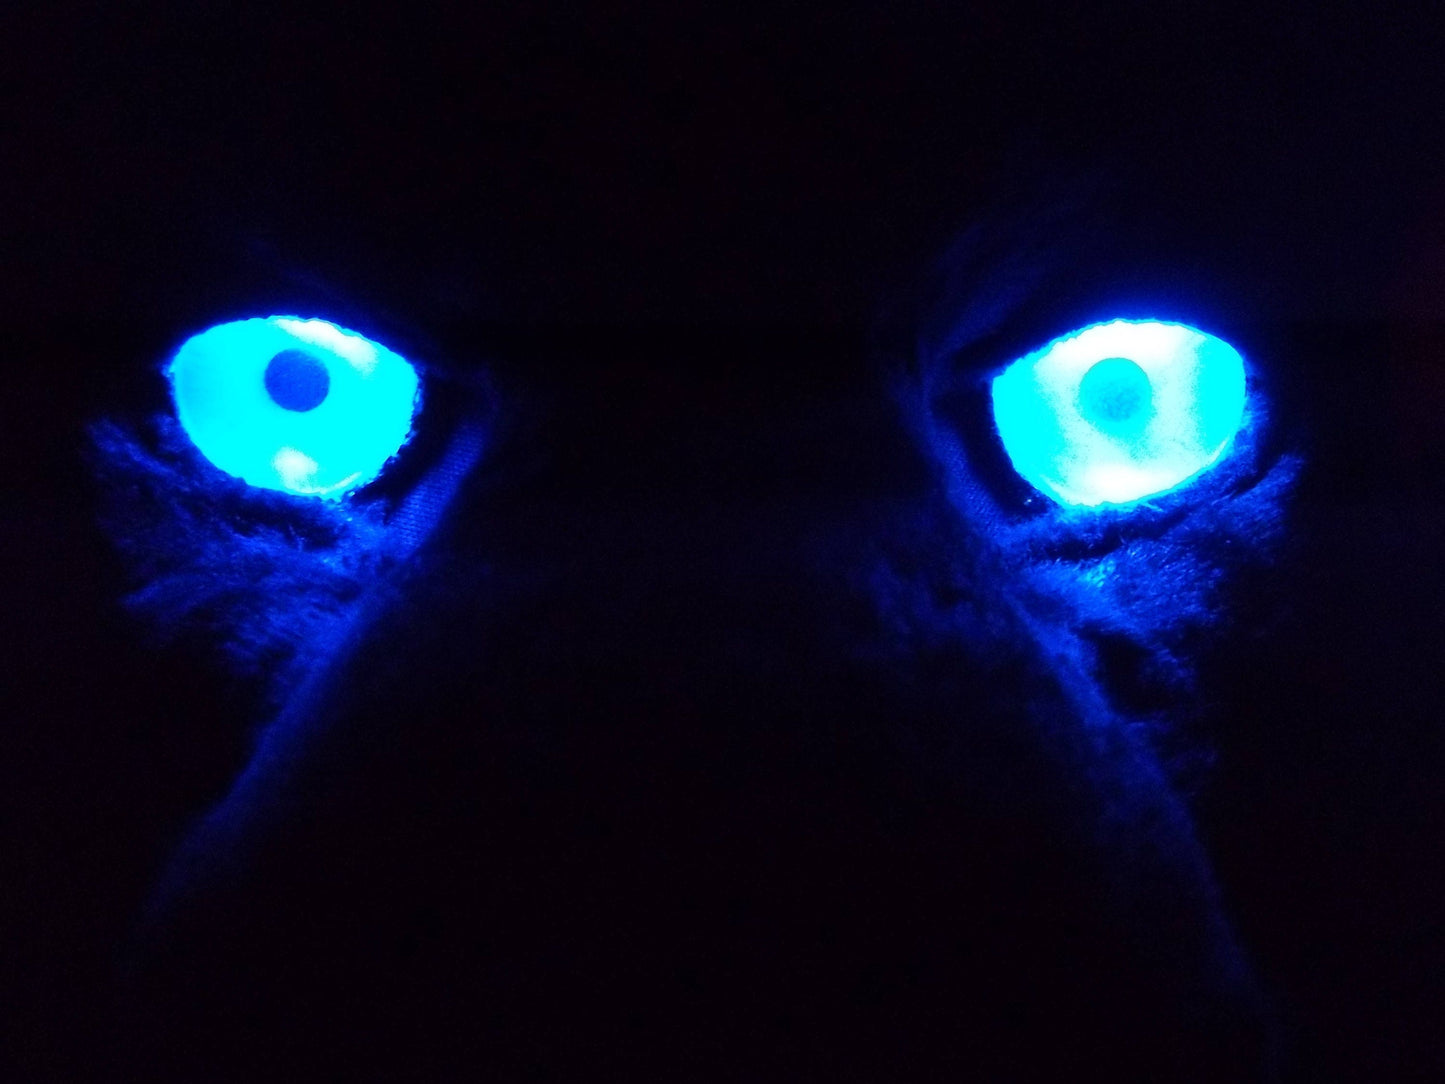 PREMADE LEDs with AA Battery Pack, For Fursuit, Crafts Etc. for jewelry, costumes, Furry costumes